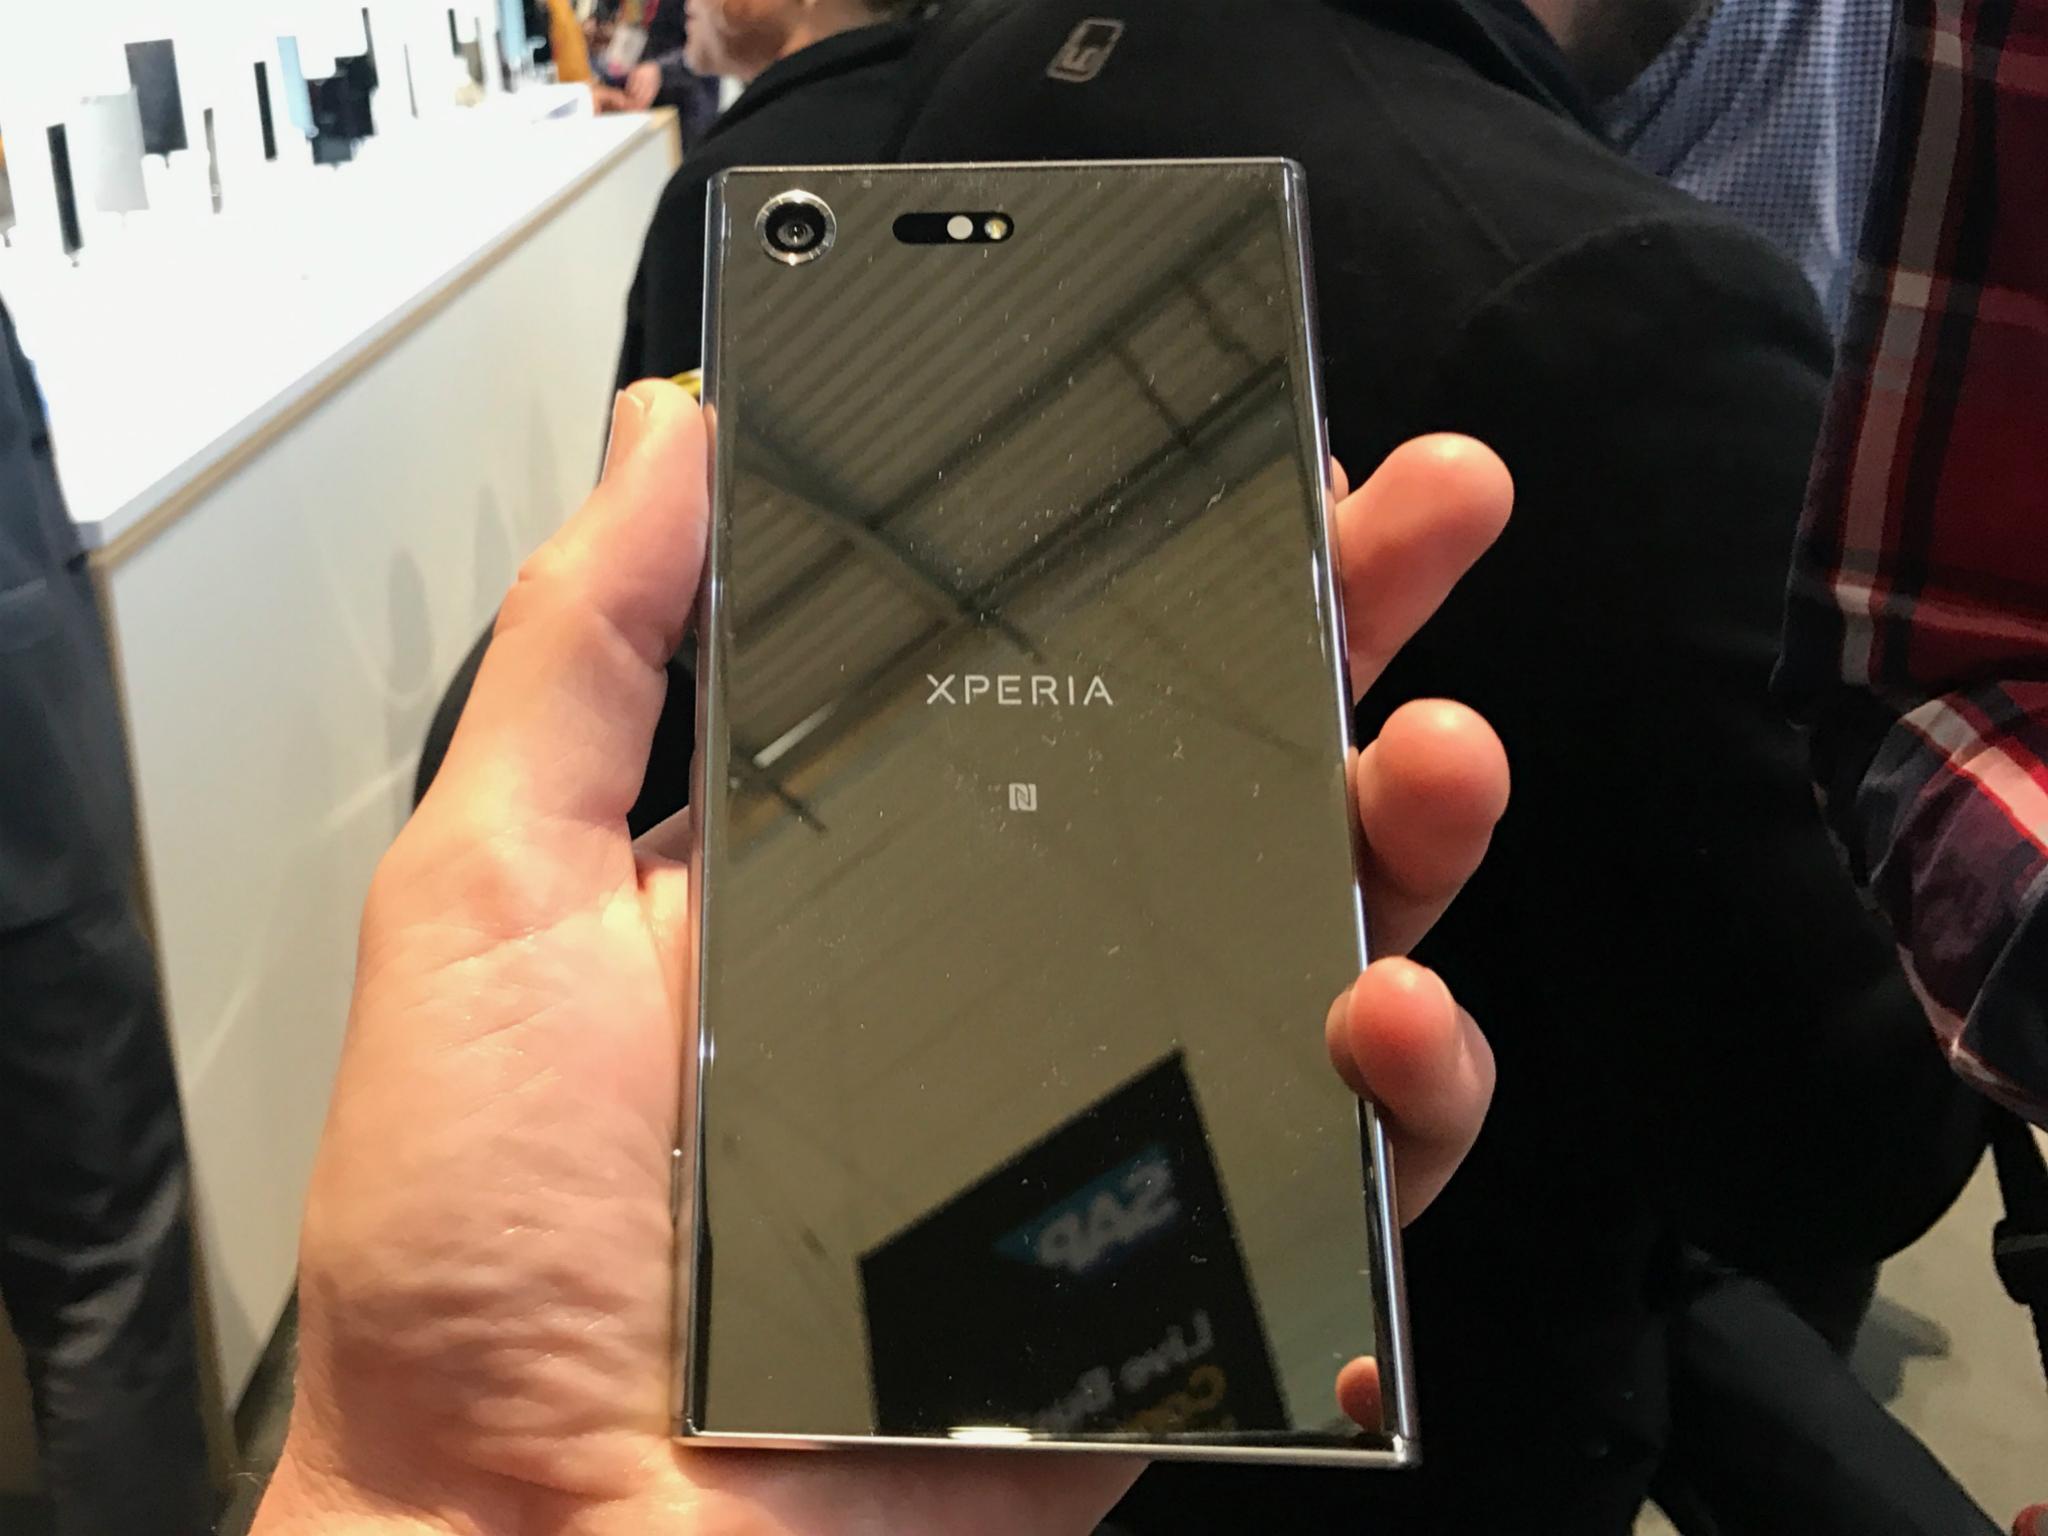 Sony Xperia XZ Premium aims to take on iPhone with stunning design